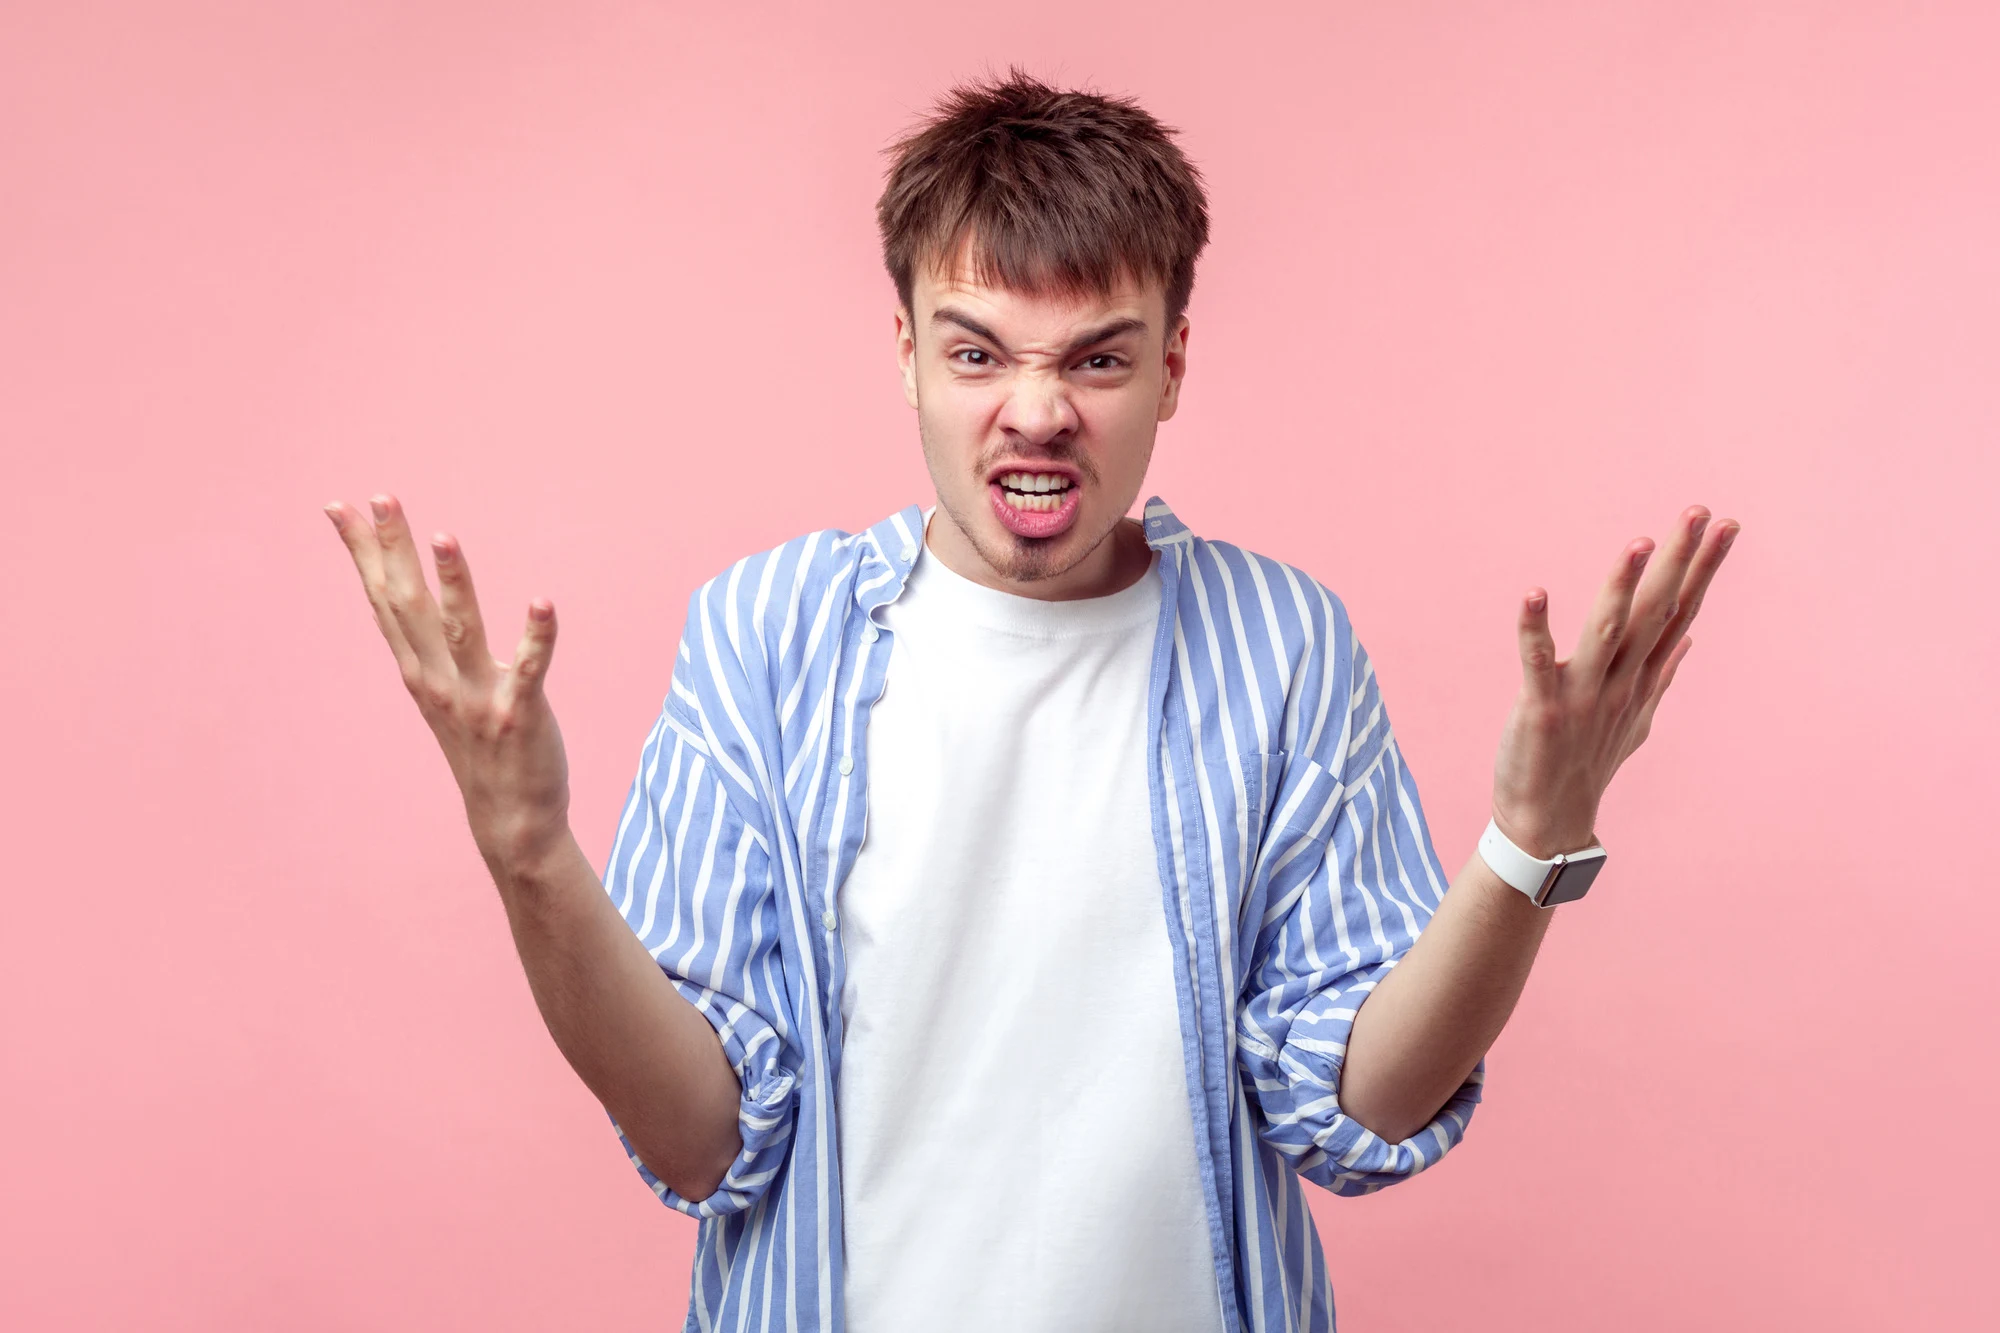 What do you want? Portrait of irritated brunette man with small beard and mustache in casual shirt raising arms in anger, asking why, furious expression. indoor studio shot isolated on pink background